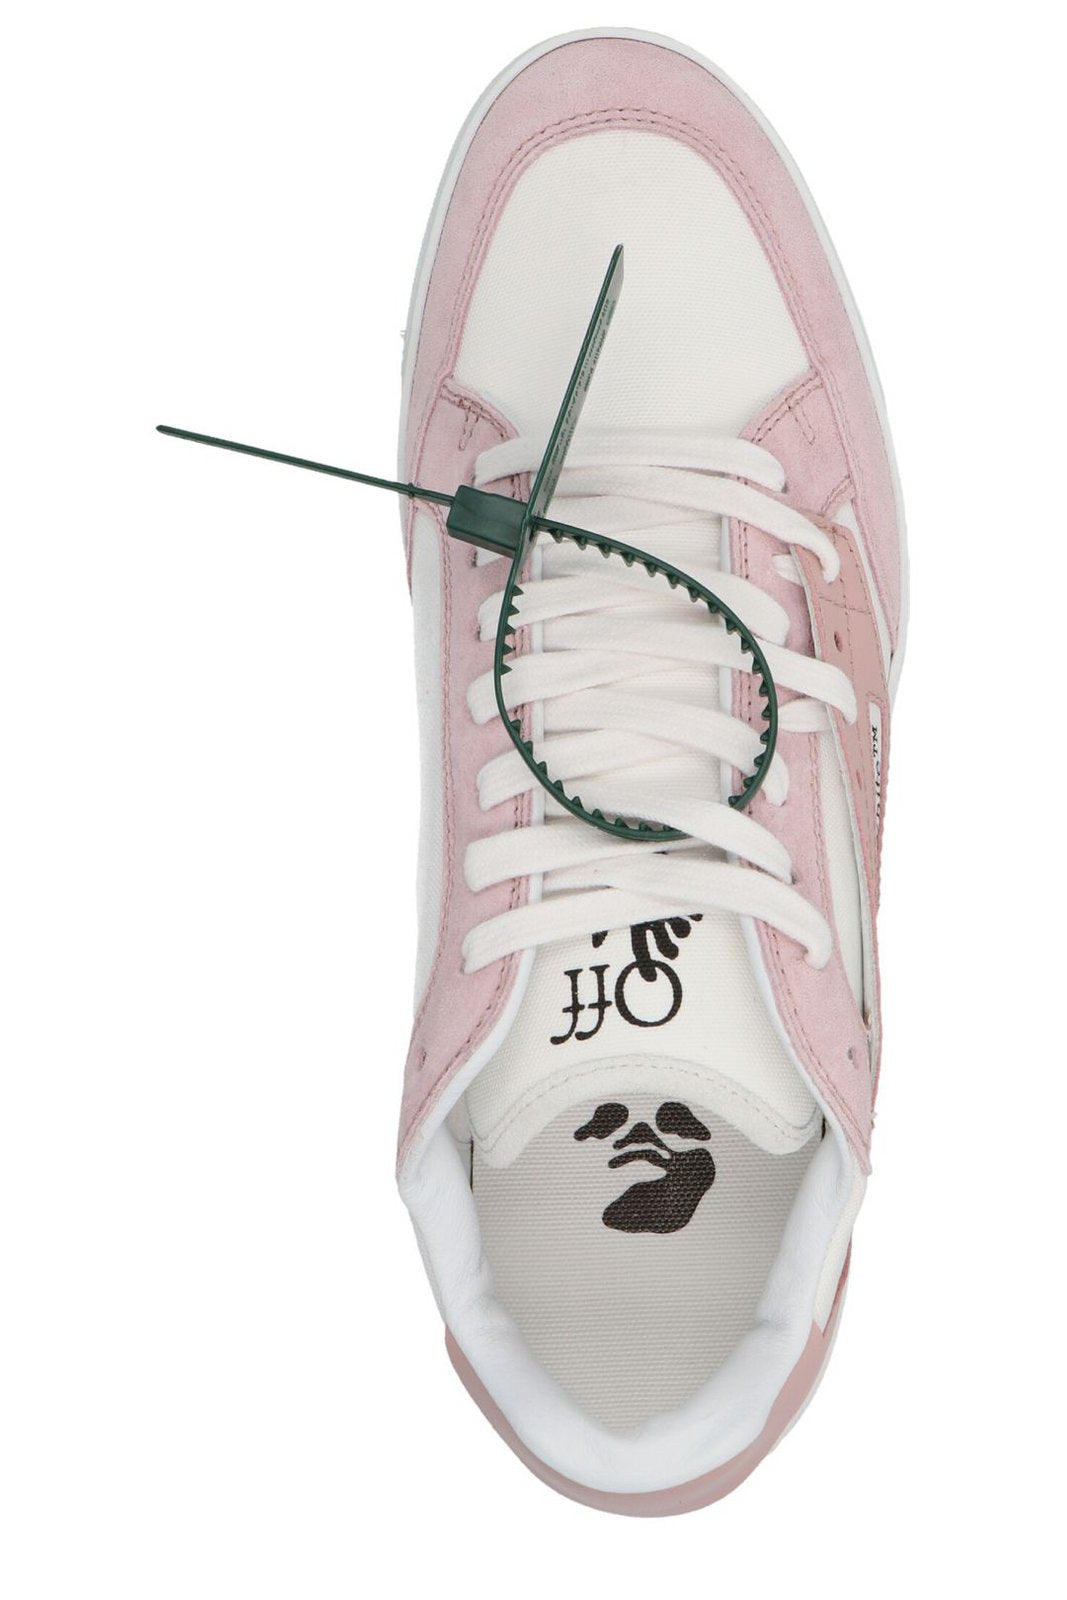 Off-White Round Toe Lace-Up Sneakers